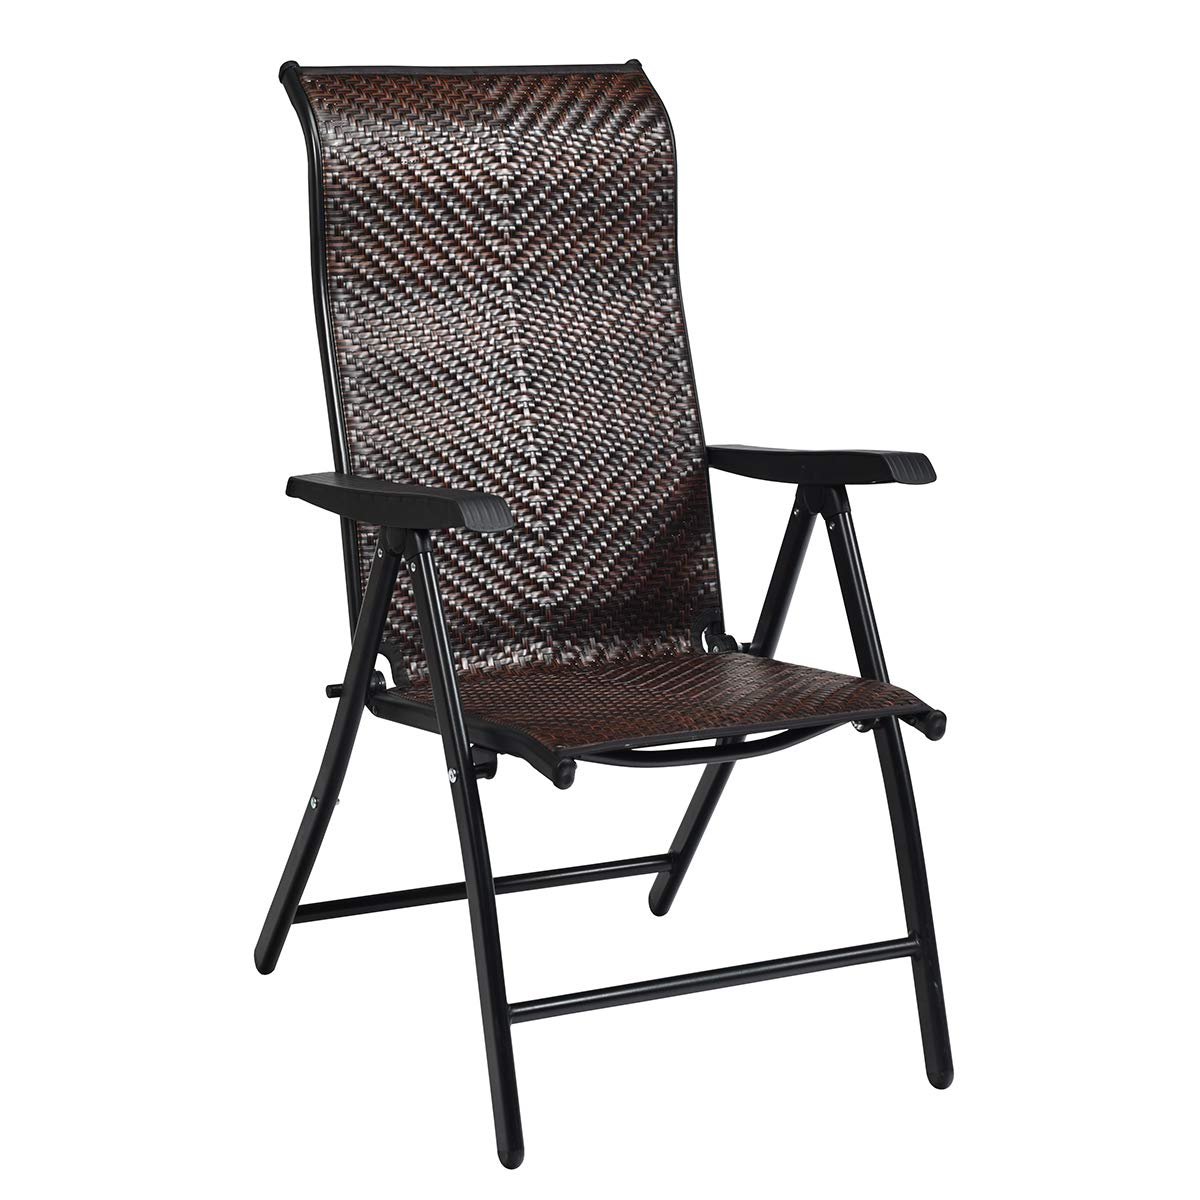 Tangkula Patio Rattan Folding Chair, Outdoor Wicker Portable Camping Chair with Widened Armrest